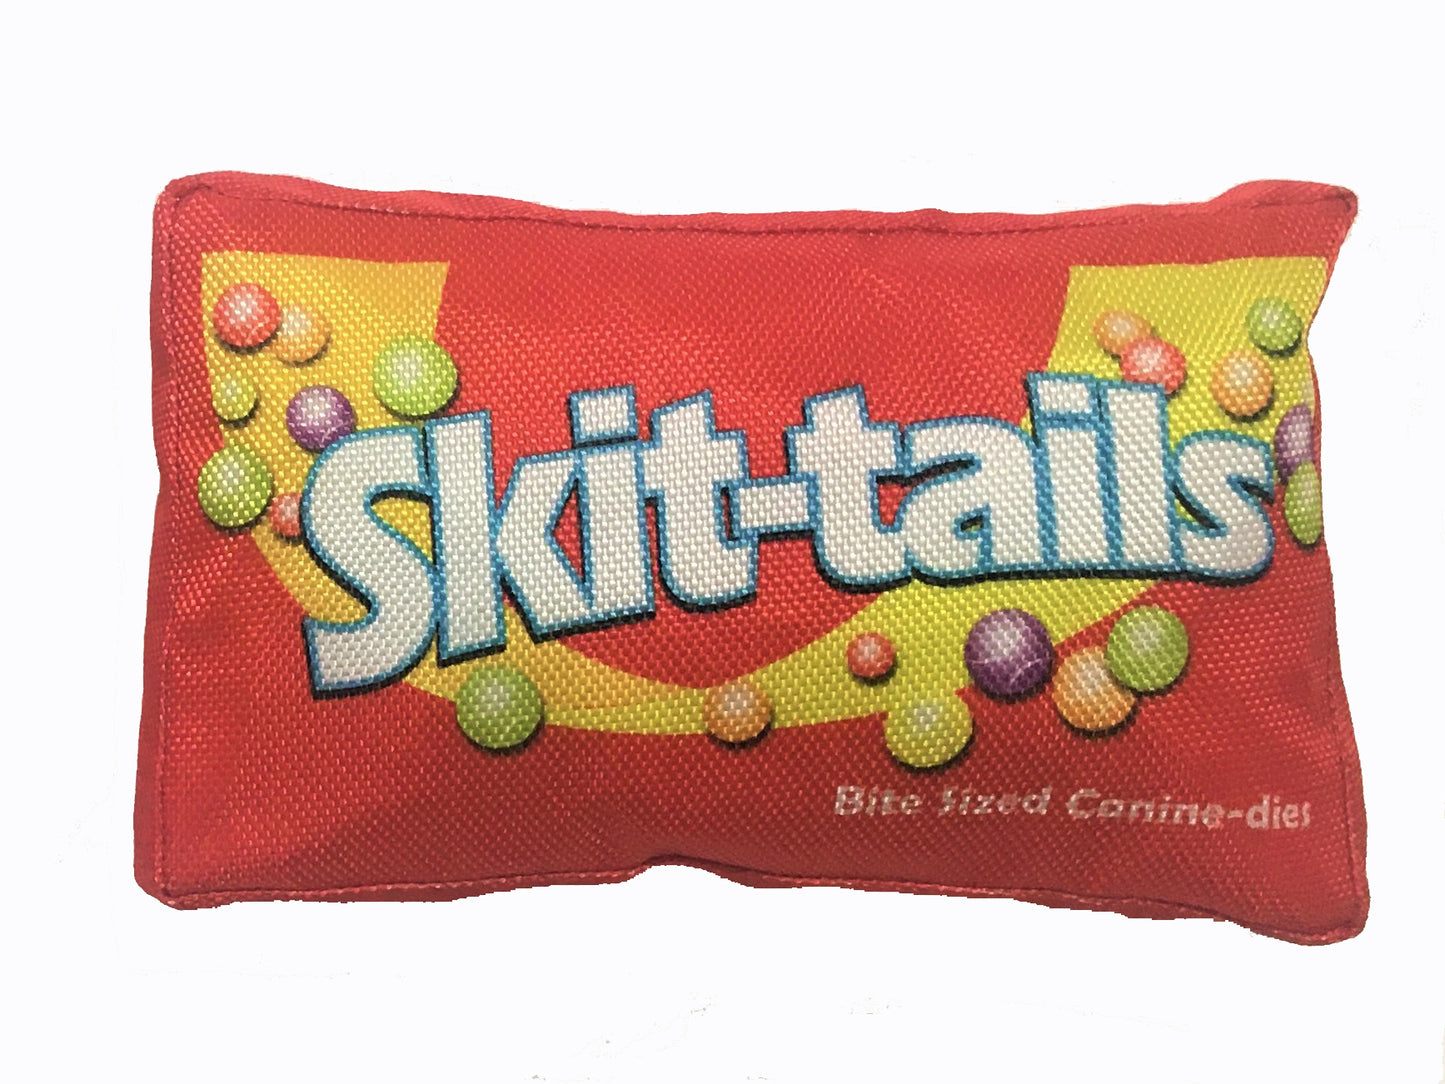 Fun Candy Skit-Tails 7"